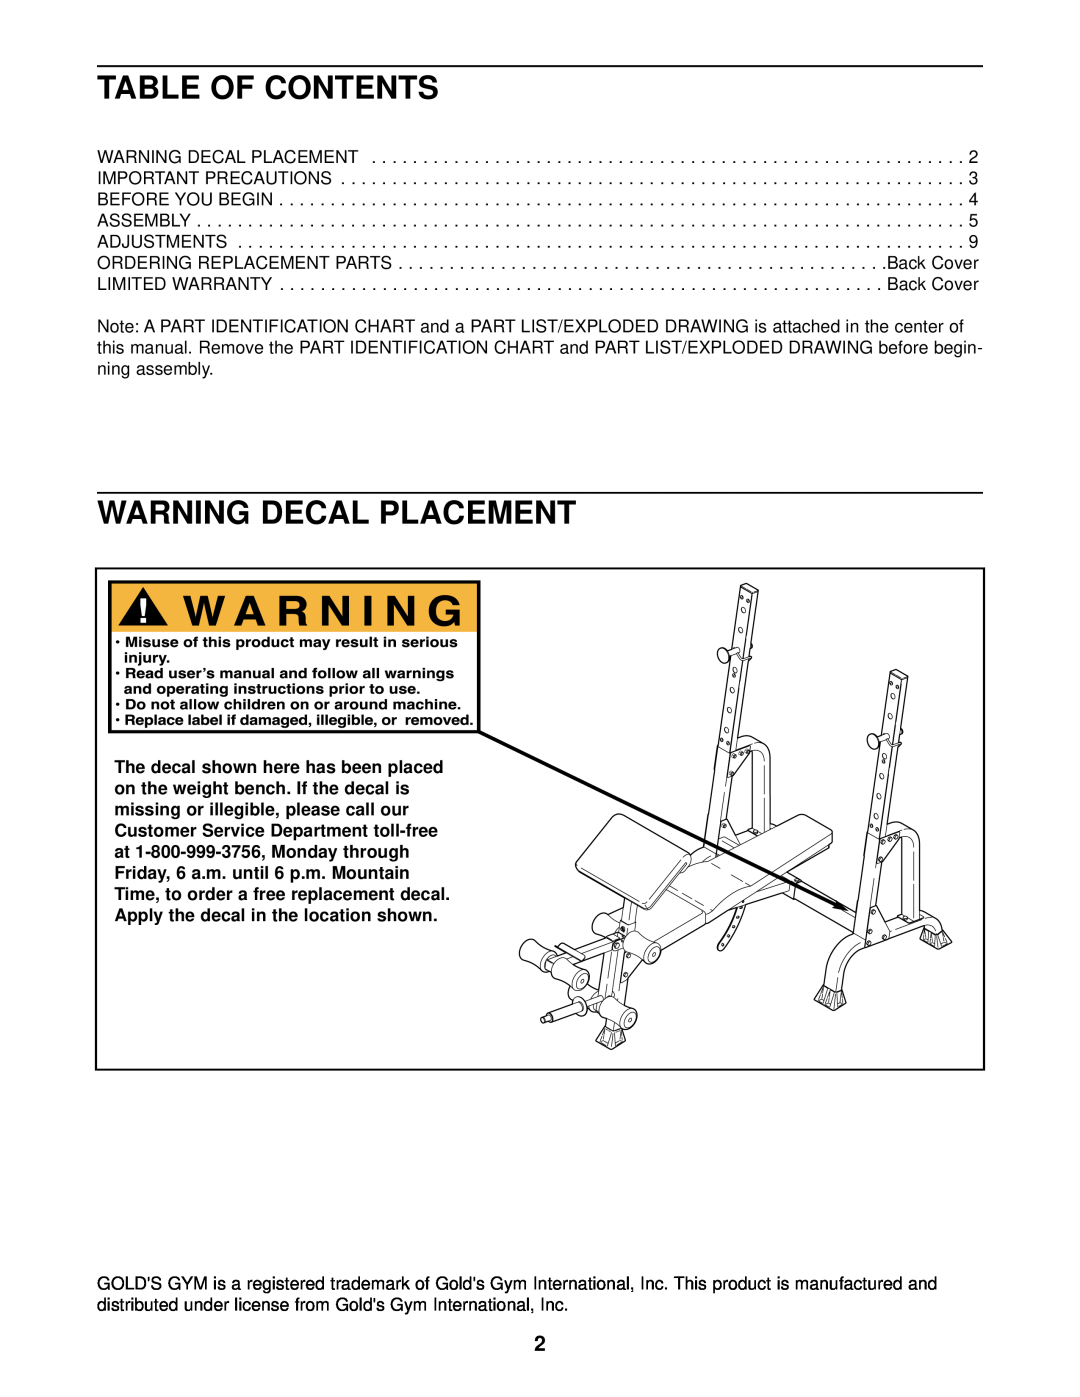 Gold's Gym GGBE14821, XR15 manual Table Of Contents, Warning Decal Placement 